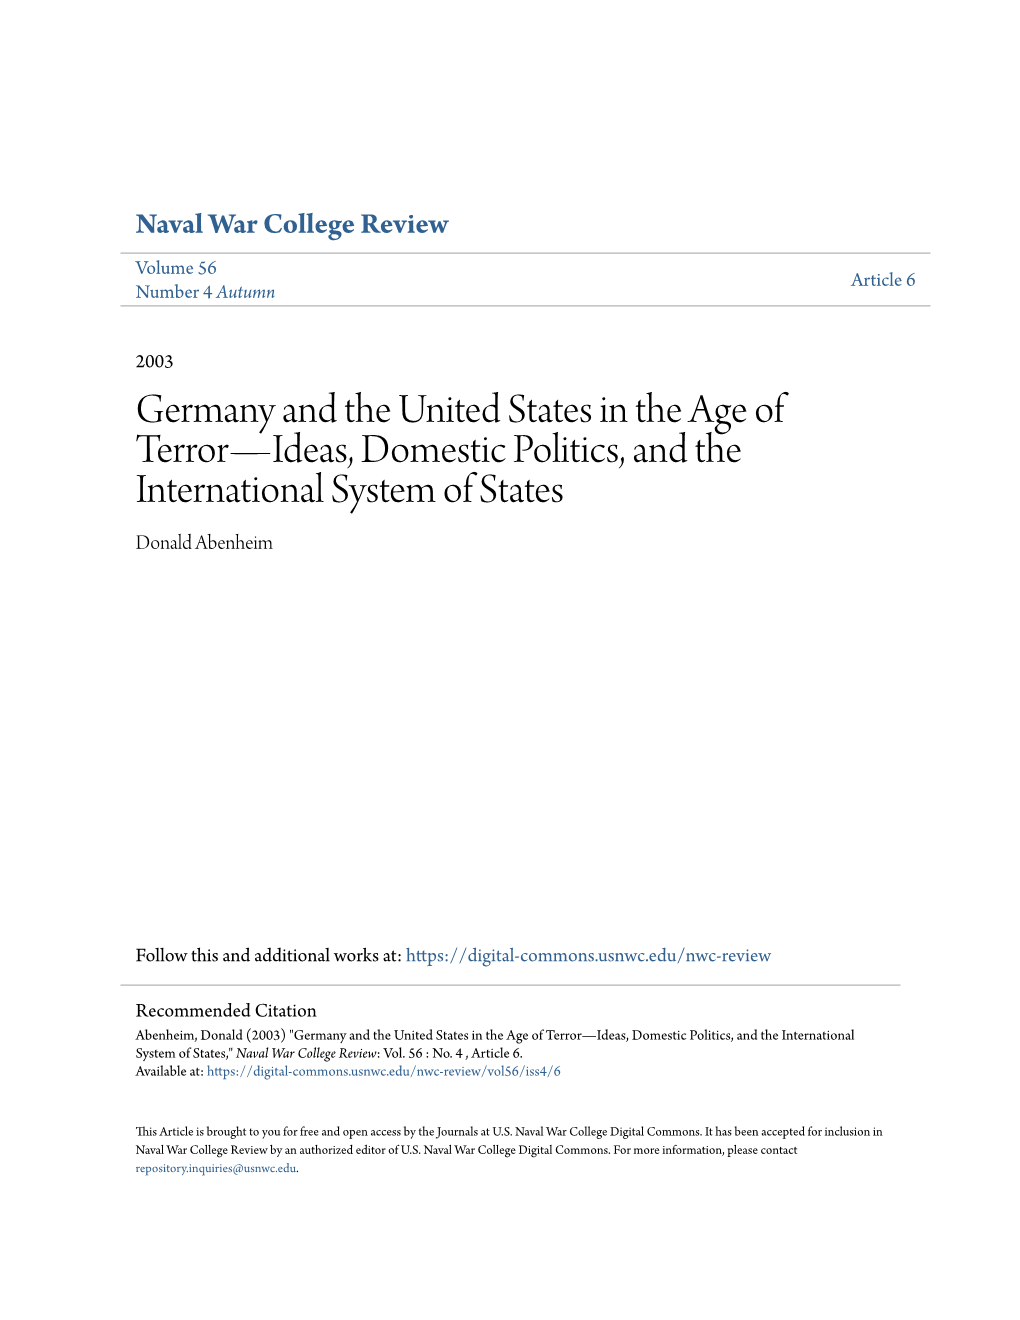 Germany and the United States in the Age of Terror—Ideas, Domestic Politics, and the International System of States Donald Abenheim